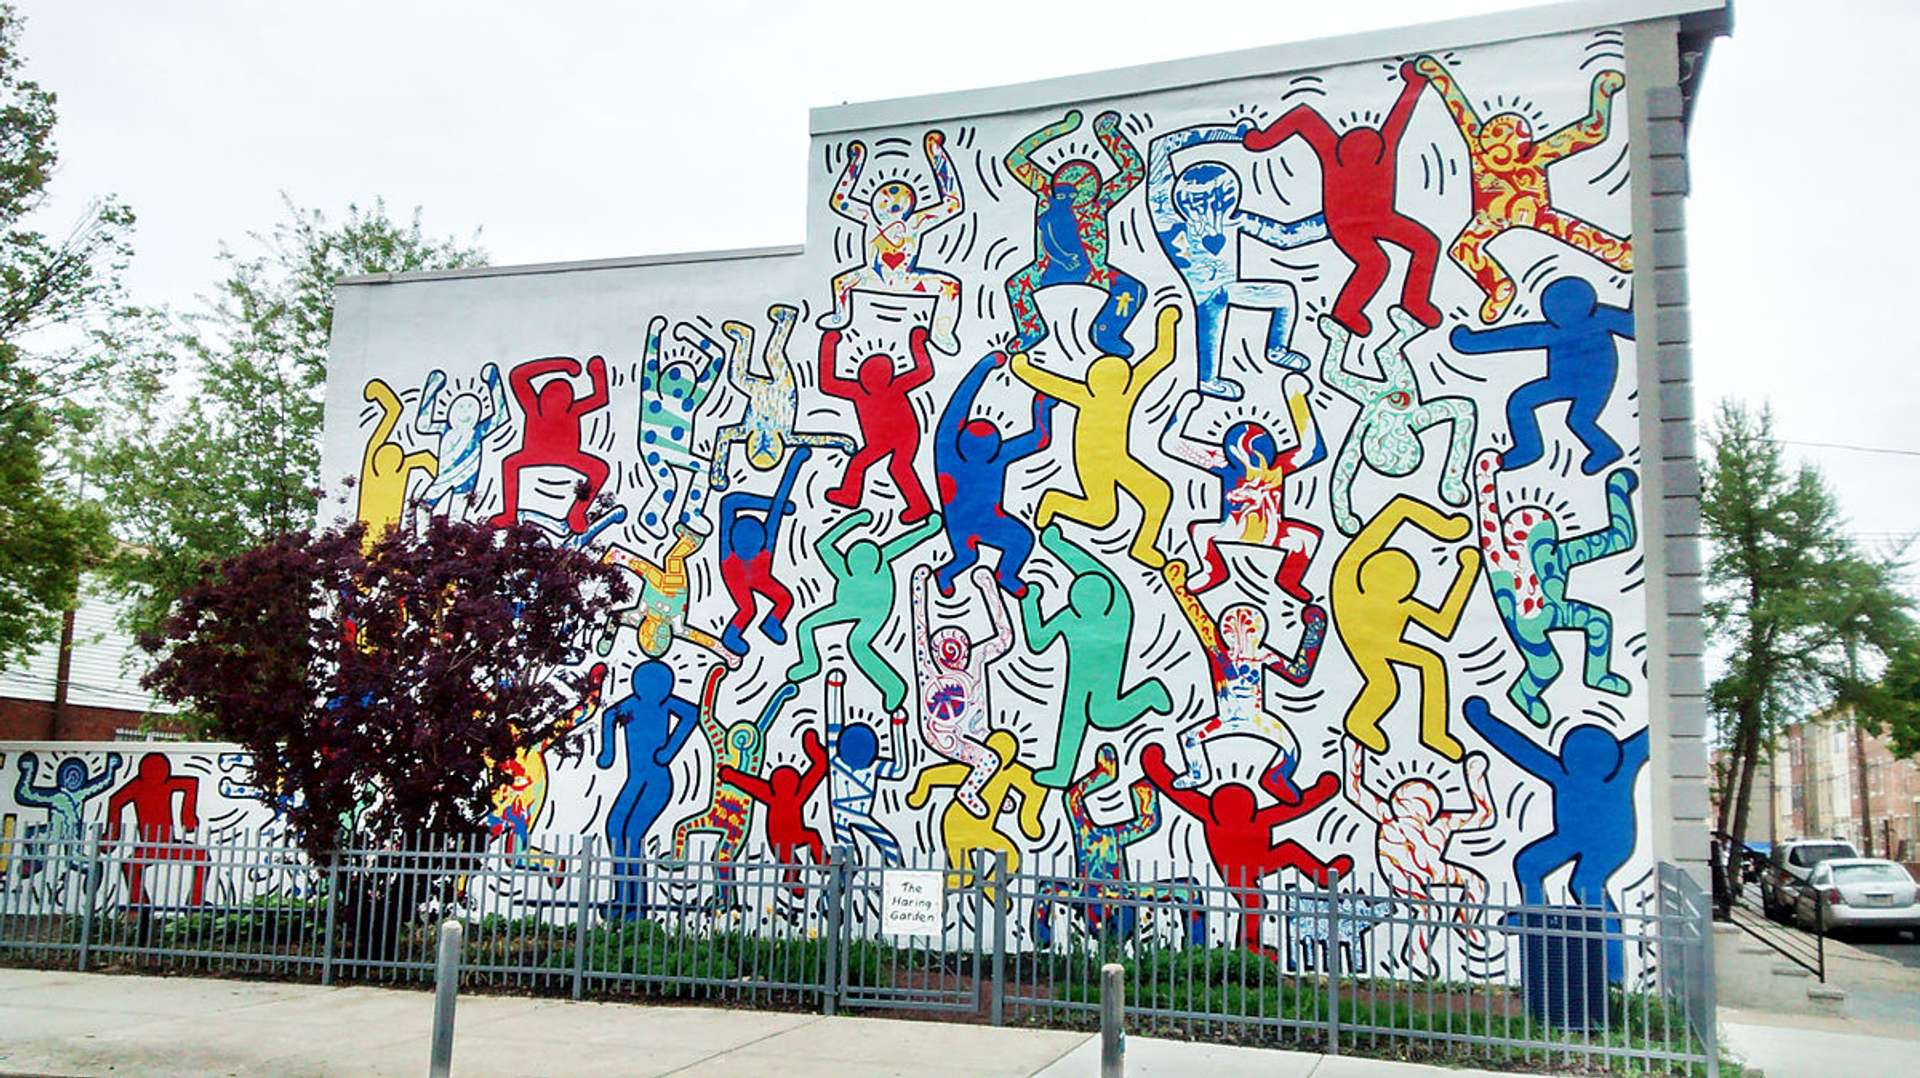 A photograph of Keith Haring's mural "We Are The Youth" at 22nd and Ellsworth Streets in Philadelphia. The mural depicts many multicoloured figures.